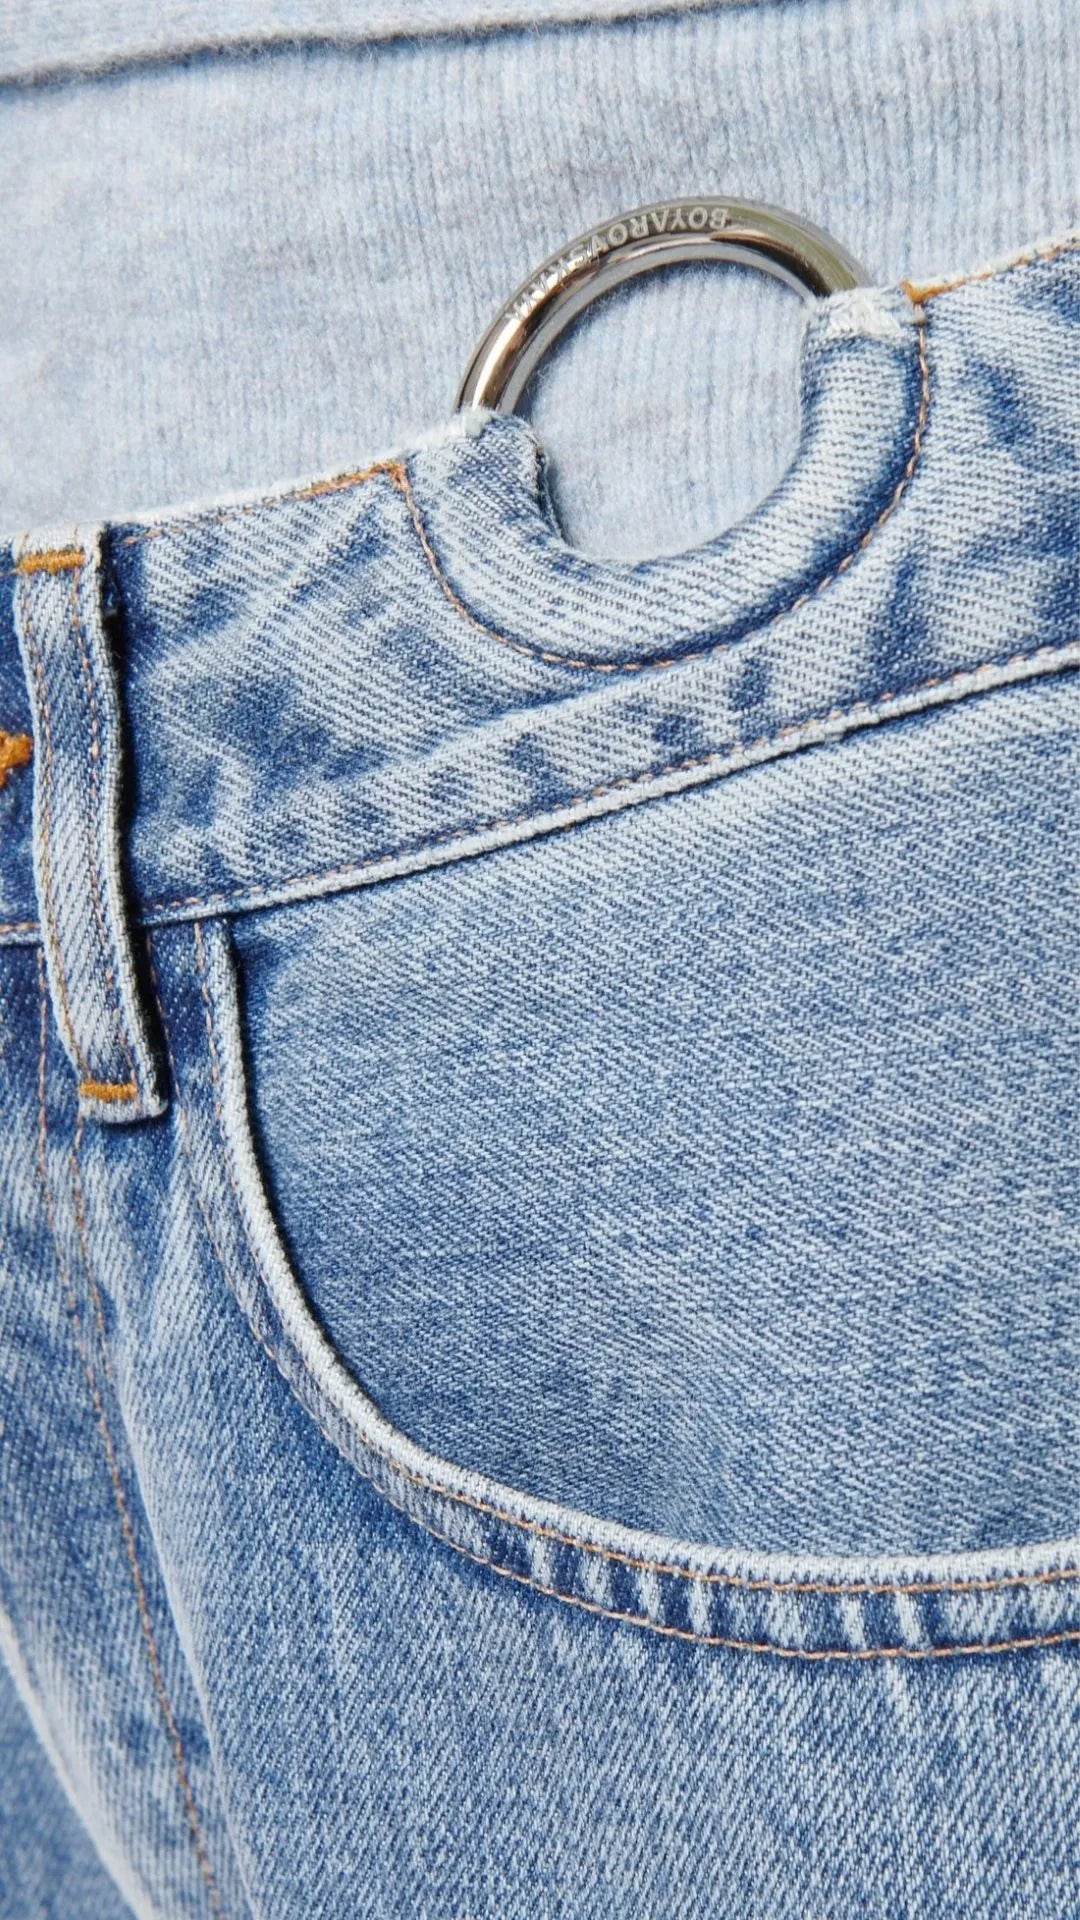 Boyarovskaya Slim Ring Jean. Light color stone denim with a slightly tapered leg and falls to just above the ankle. Zipper closure with silver ring detail on the front right. Photo of ring detail.